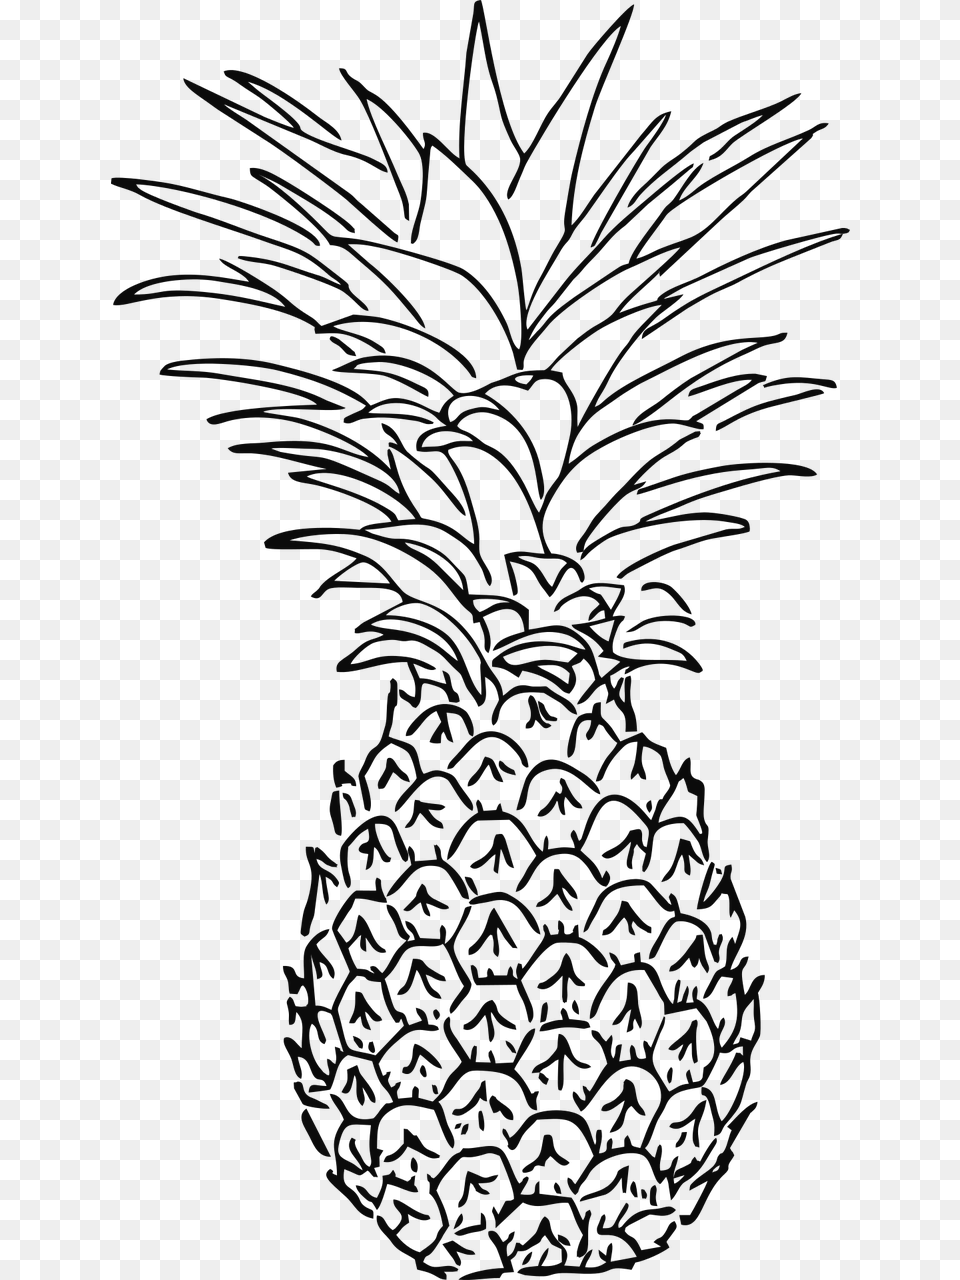 Pineapple Black And White, Food, Fruit, Plant, Produce Png